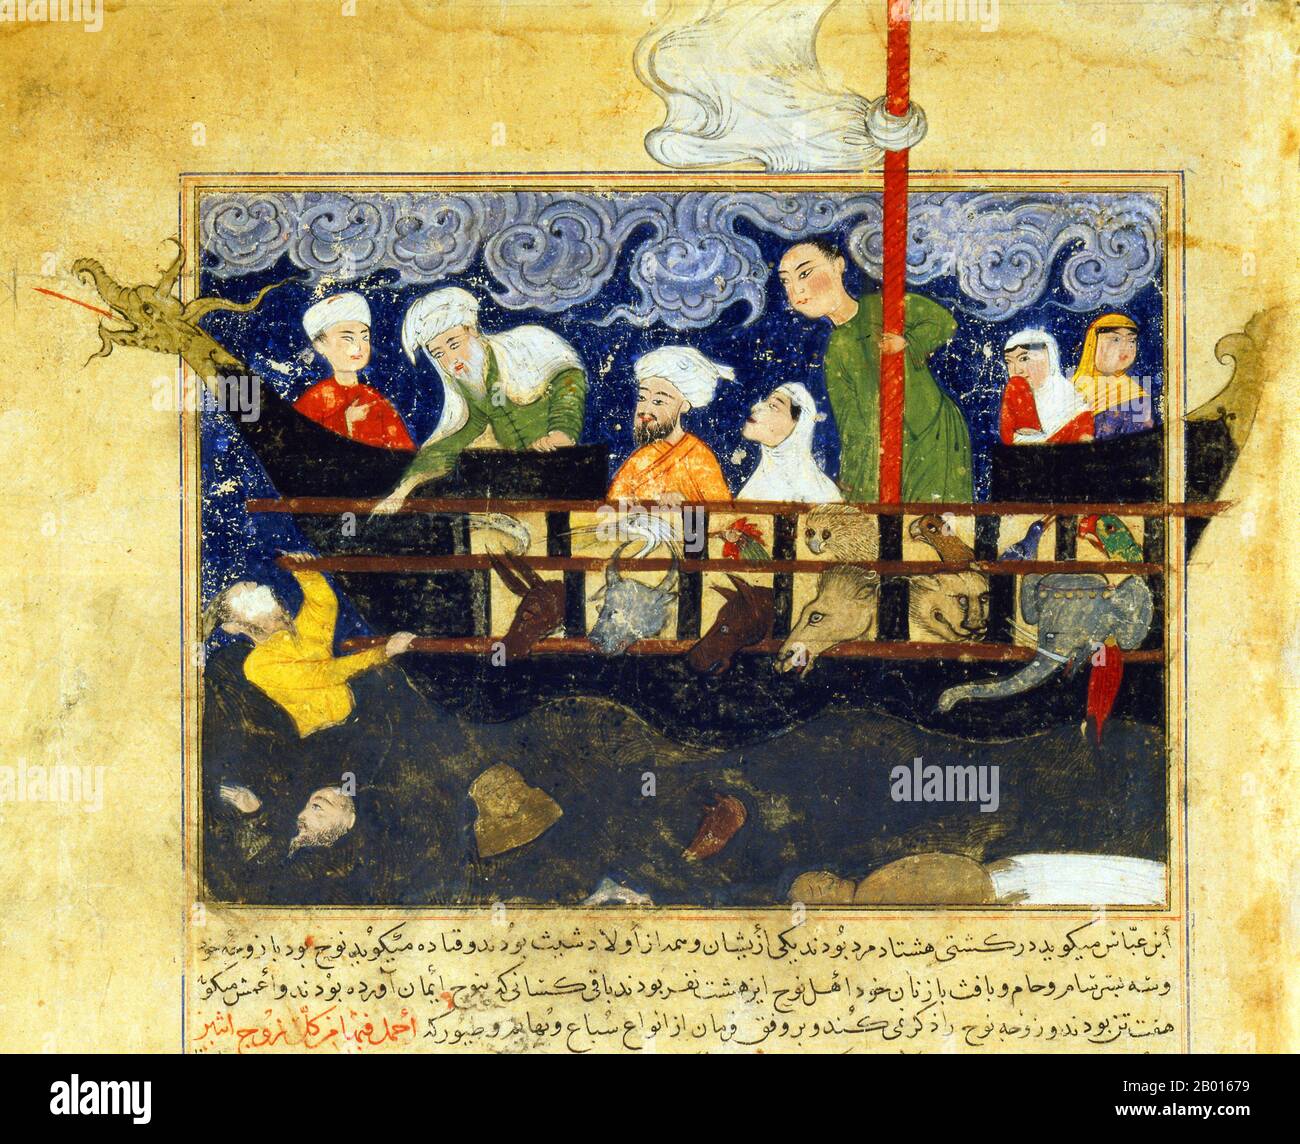 Afghanistan: Detail of a miniature painting of Noah's Ark, from Hafiz-i Abru’s Majma al-tawarikh, c. 1425.  Timur’s son Shah Rukh (1405-1447) ordered the historian Hafiz-i Abru to write a continuation of Rashid al-Din’s famous history of the world, Jami al-tawarikh. Like the Il-Khanids, the Timurid Dynasty was concerned with legitimising their right to reign, and Hafiz-i Abru’s “A Collection of Histories” covers a period that included the time of Shah Rukh himself. Stock Photo